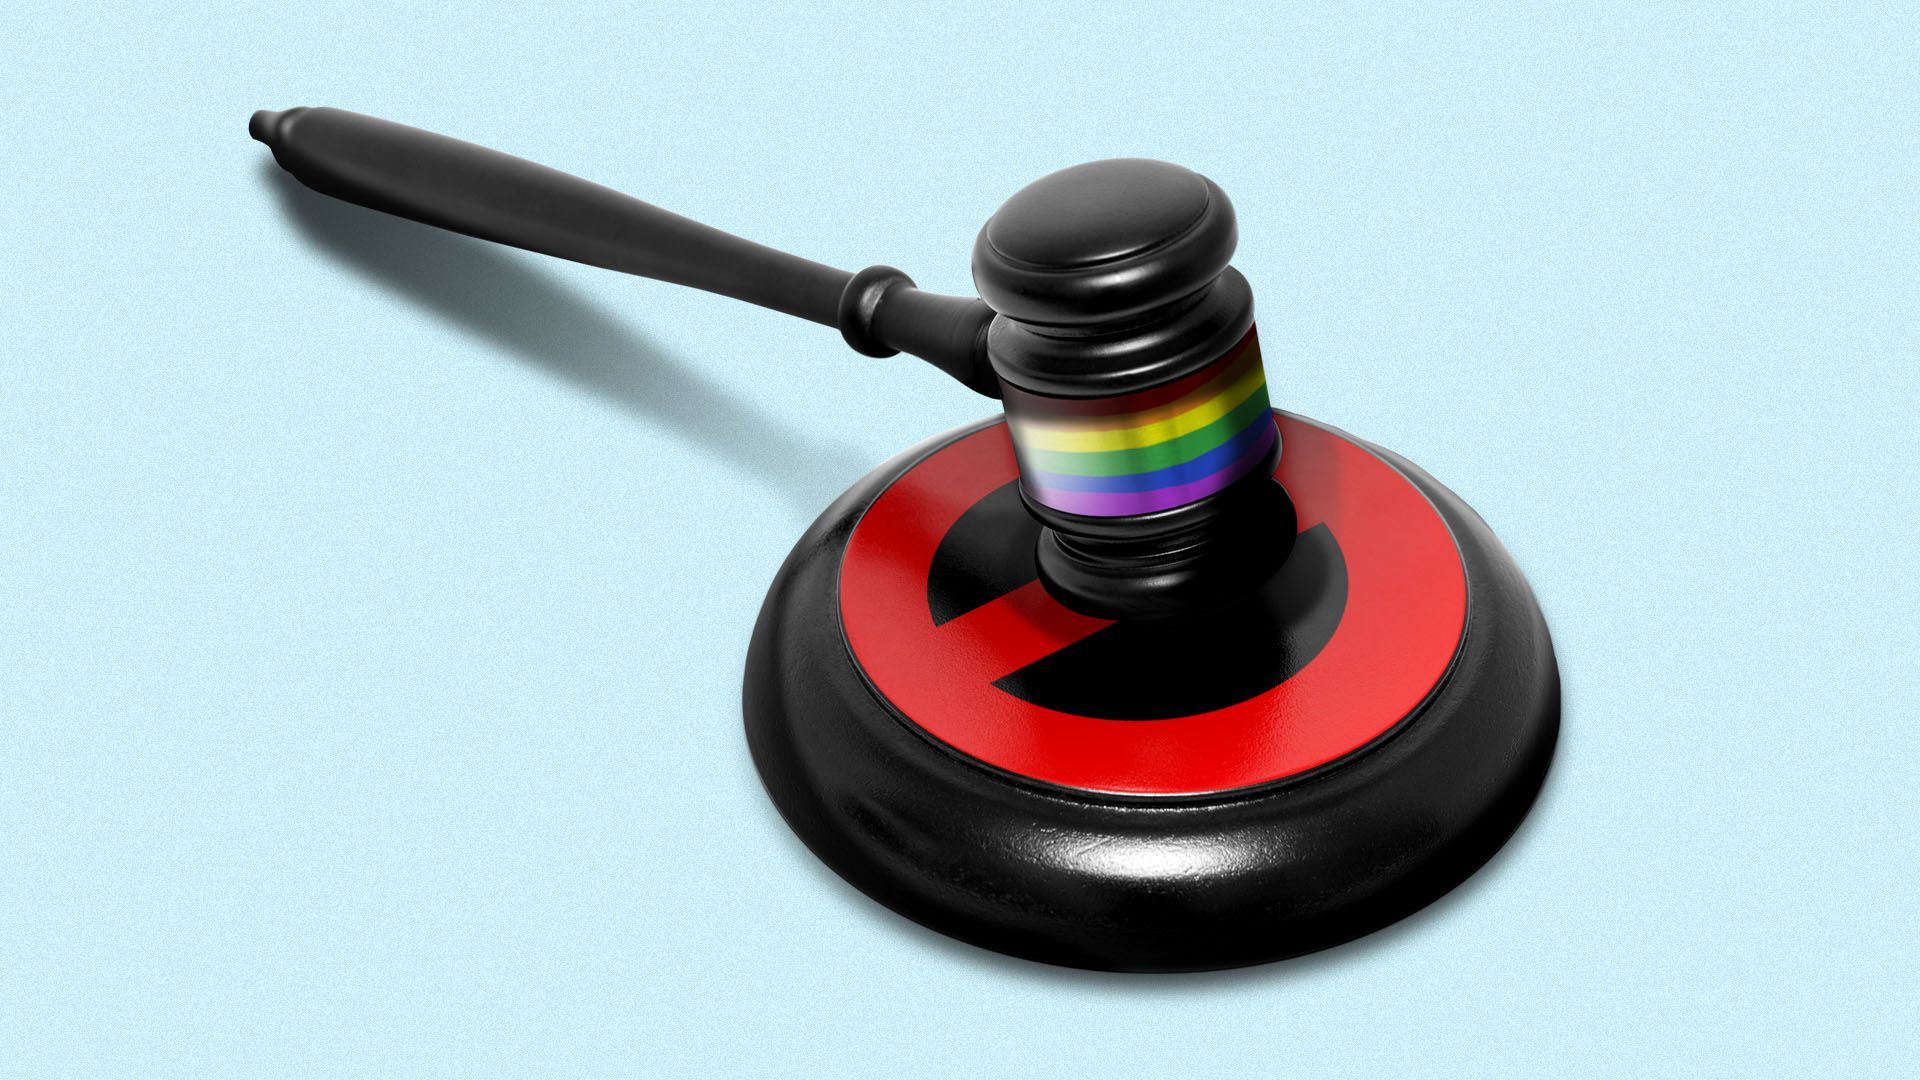 Illustration of a judge's gavel with an LGBTQ flag on it, on top of gavel block with the "no" symbol on it